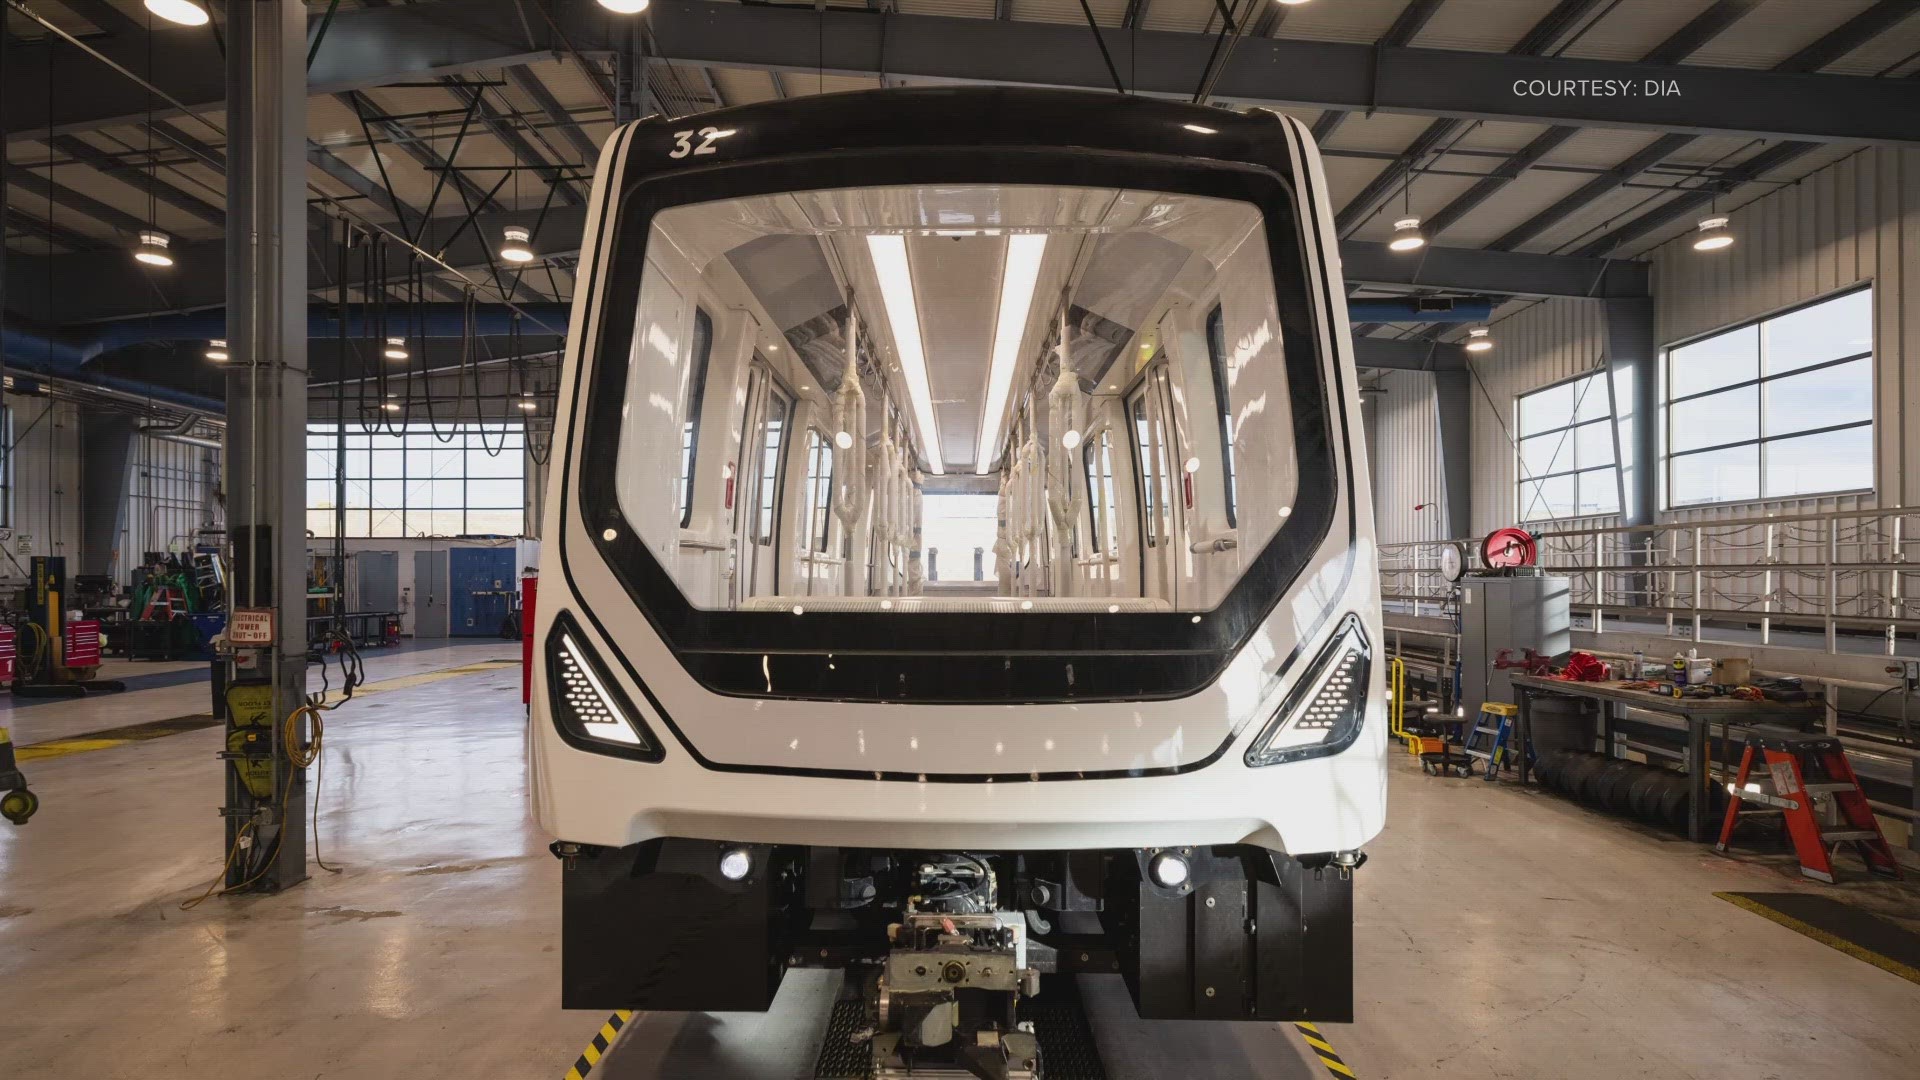 The fleet of new train cars is expected to be operational by summer 2024.